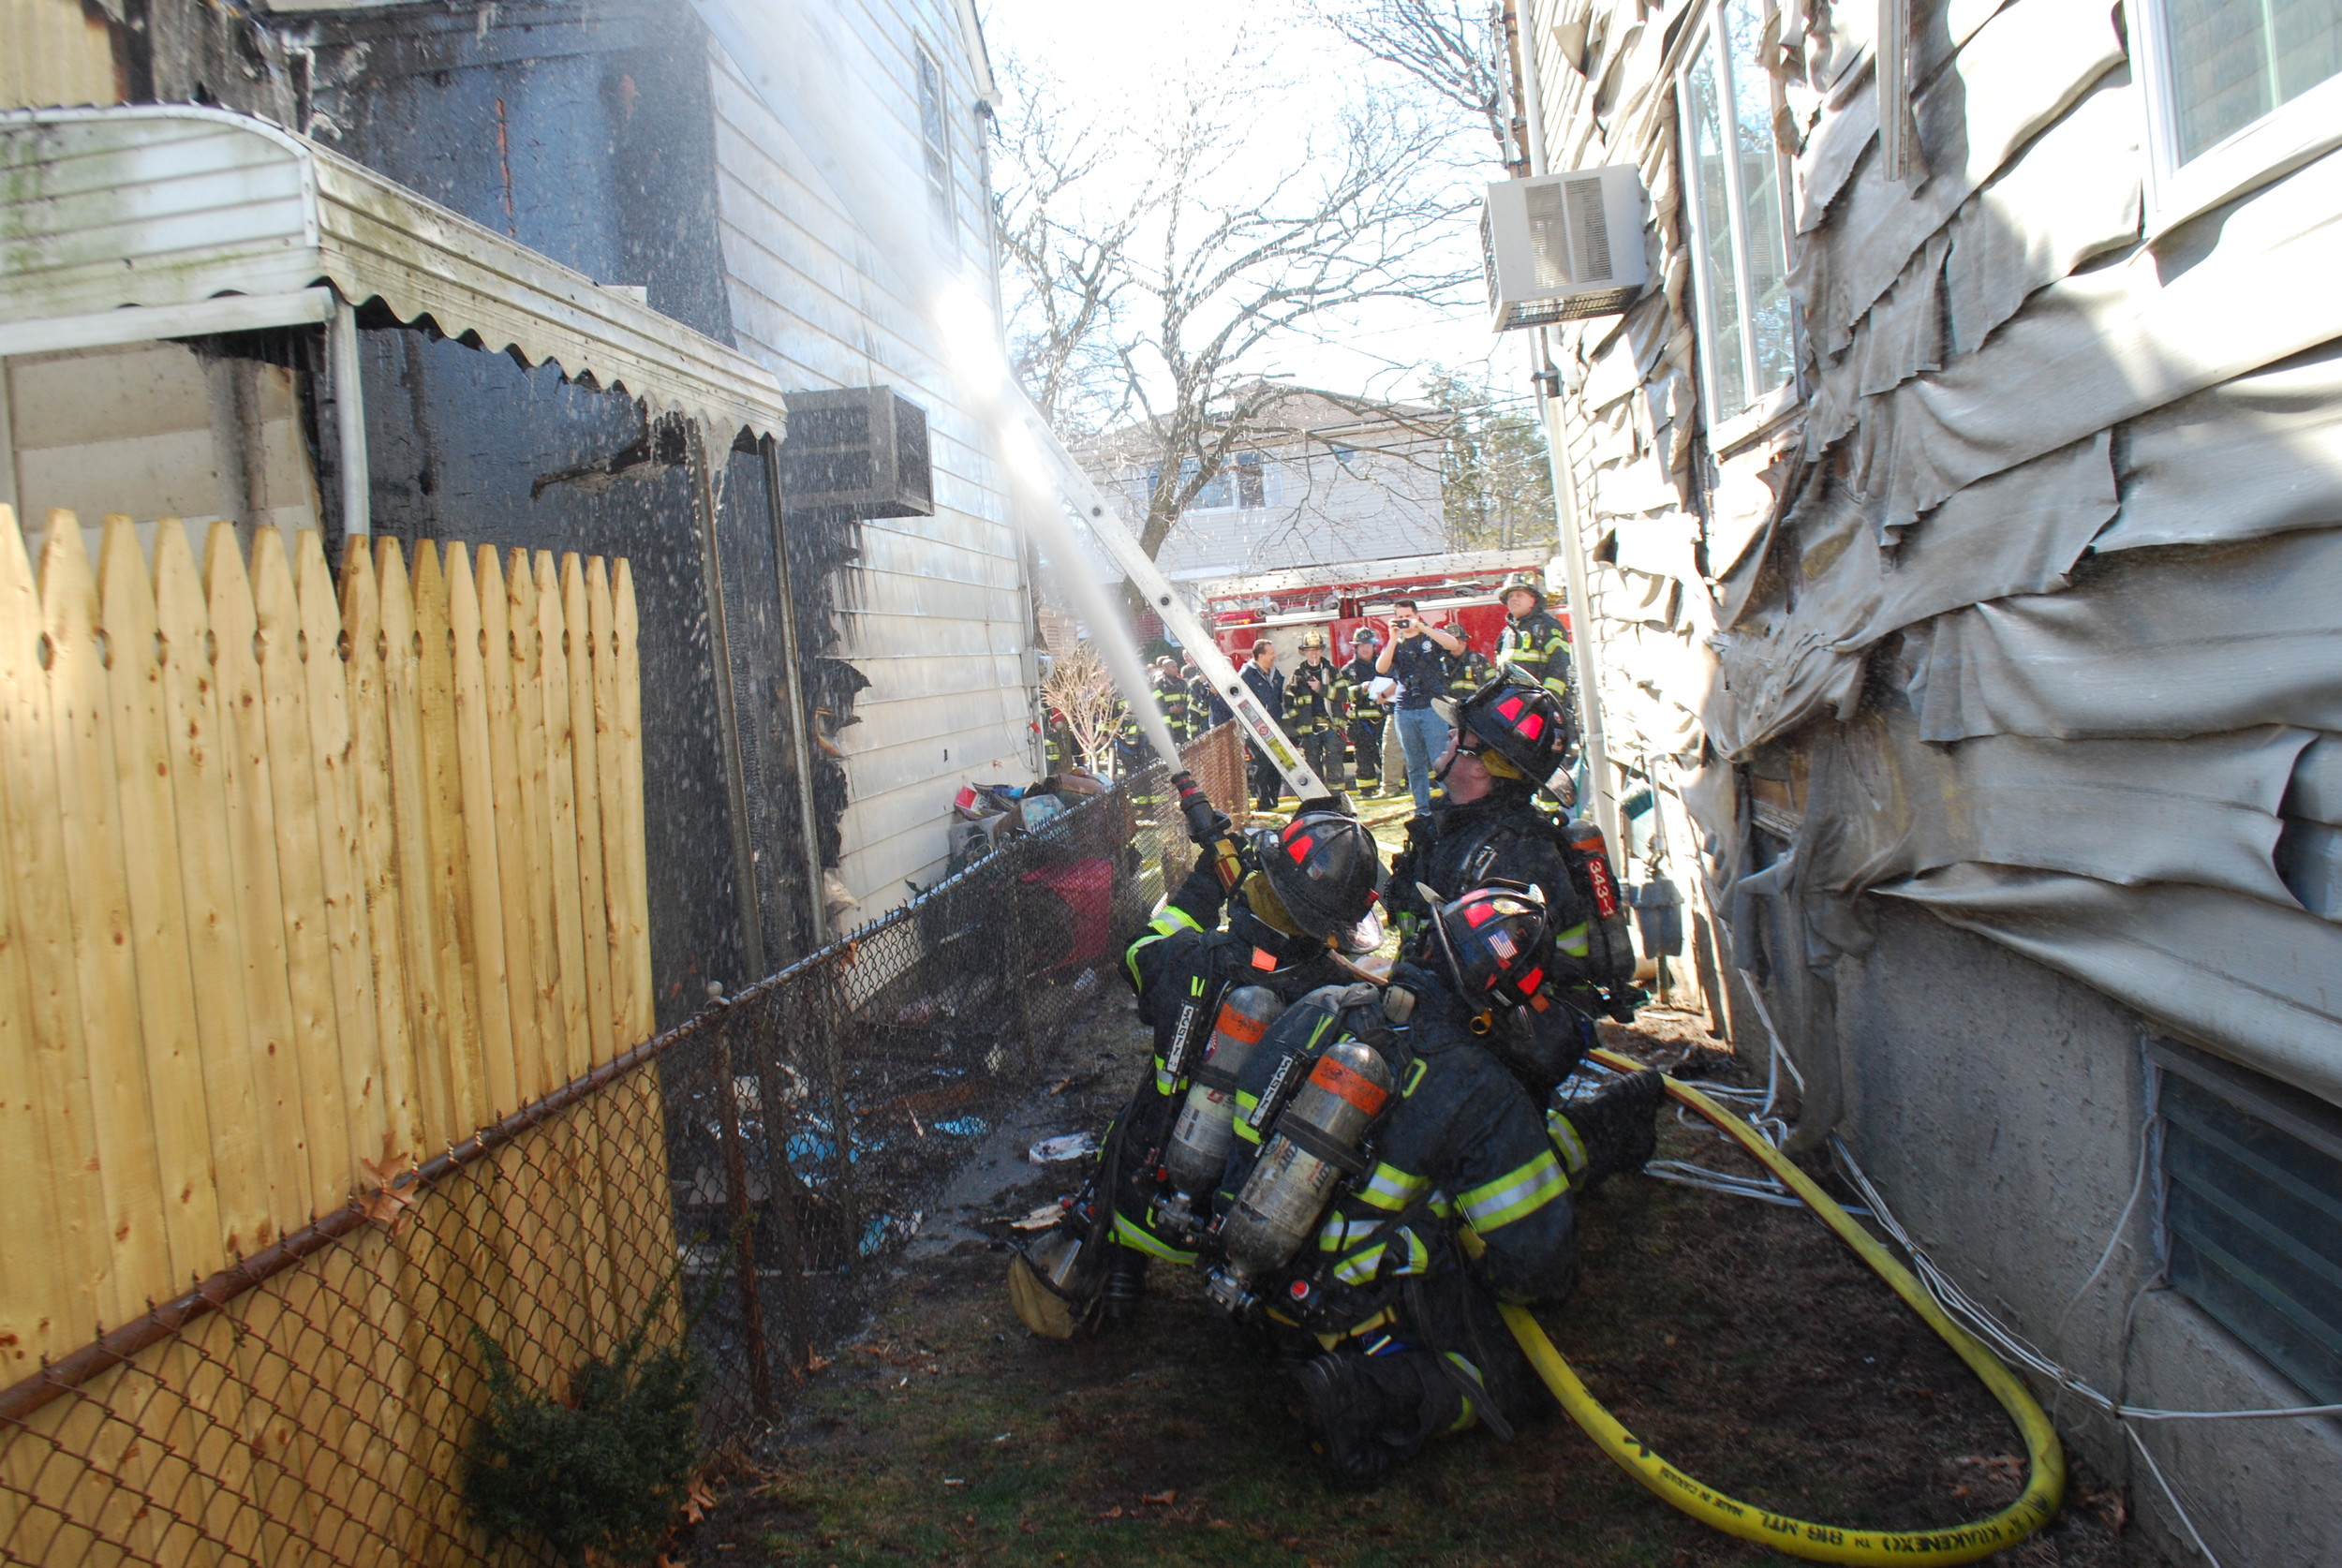 The top floor of the house was engulfed in flames at about 11 a.m. on Feb. 20.